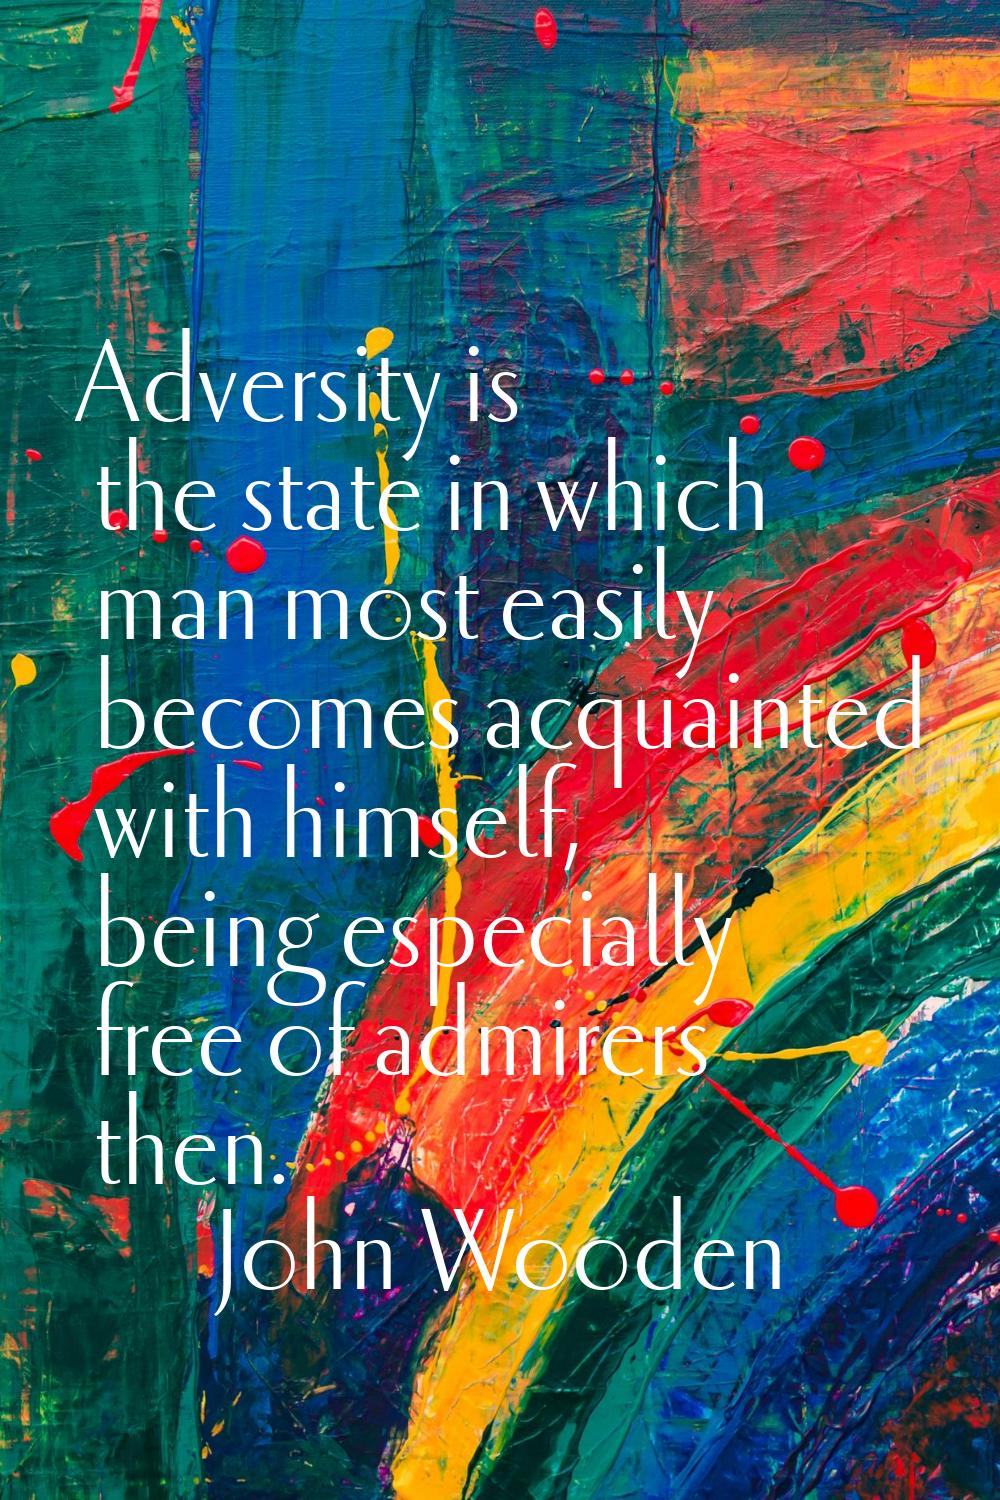 Adversity is the state in which man most easily becomes acquainted with himself, being especially f